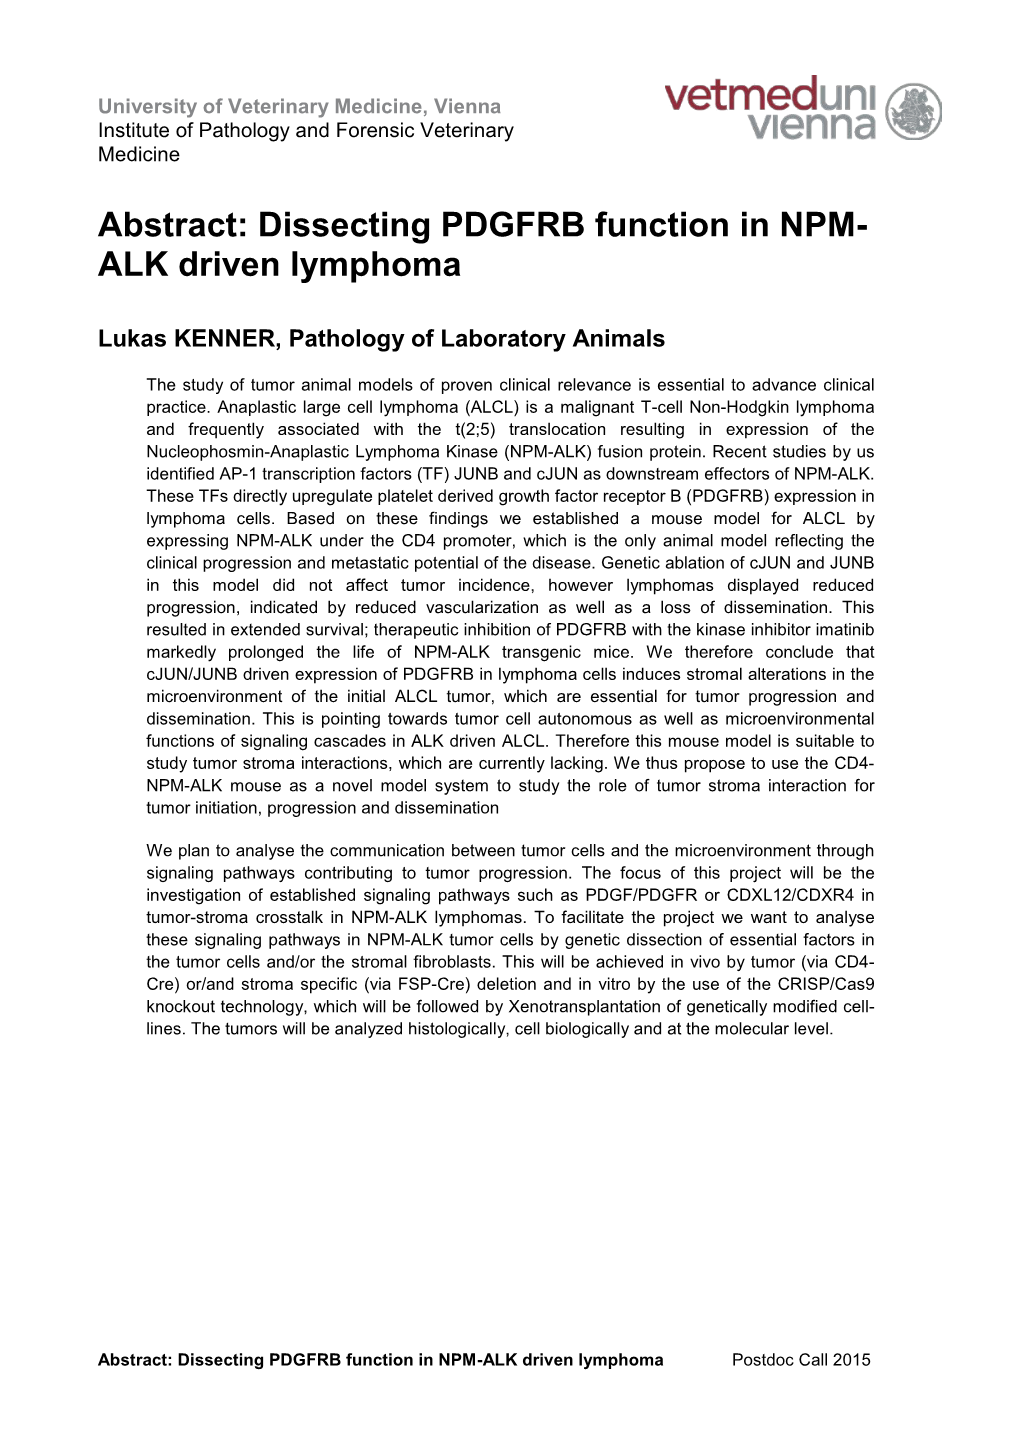 Abstract: Dissecting PDGFRB Function in NPM- ALK Driven Lymphoma